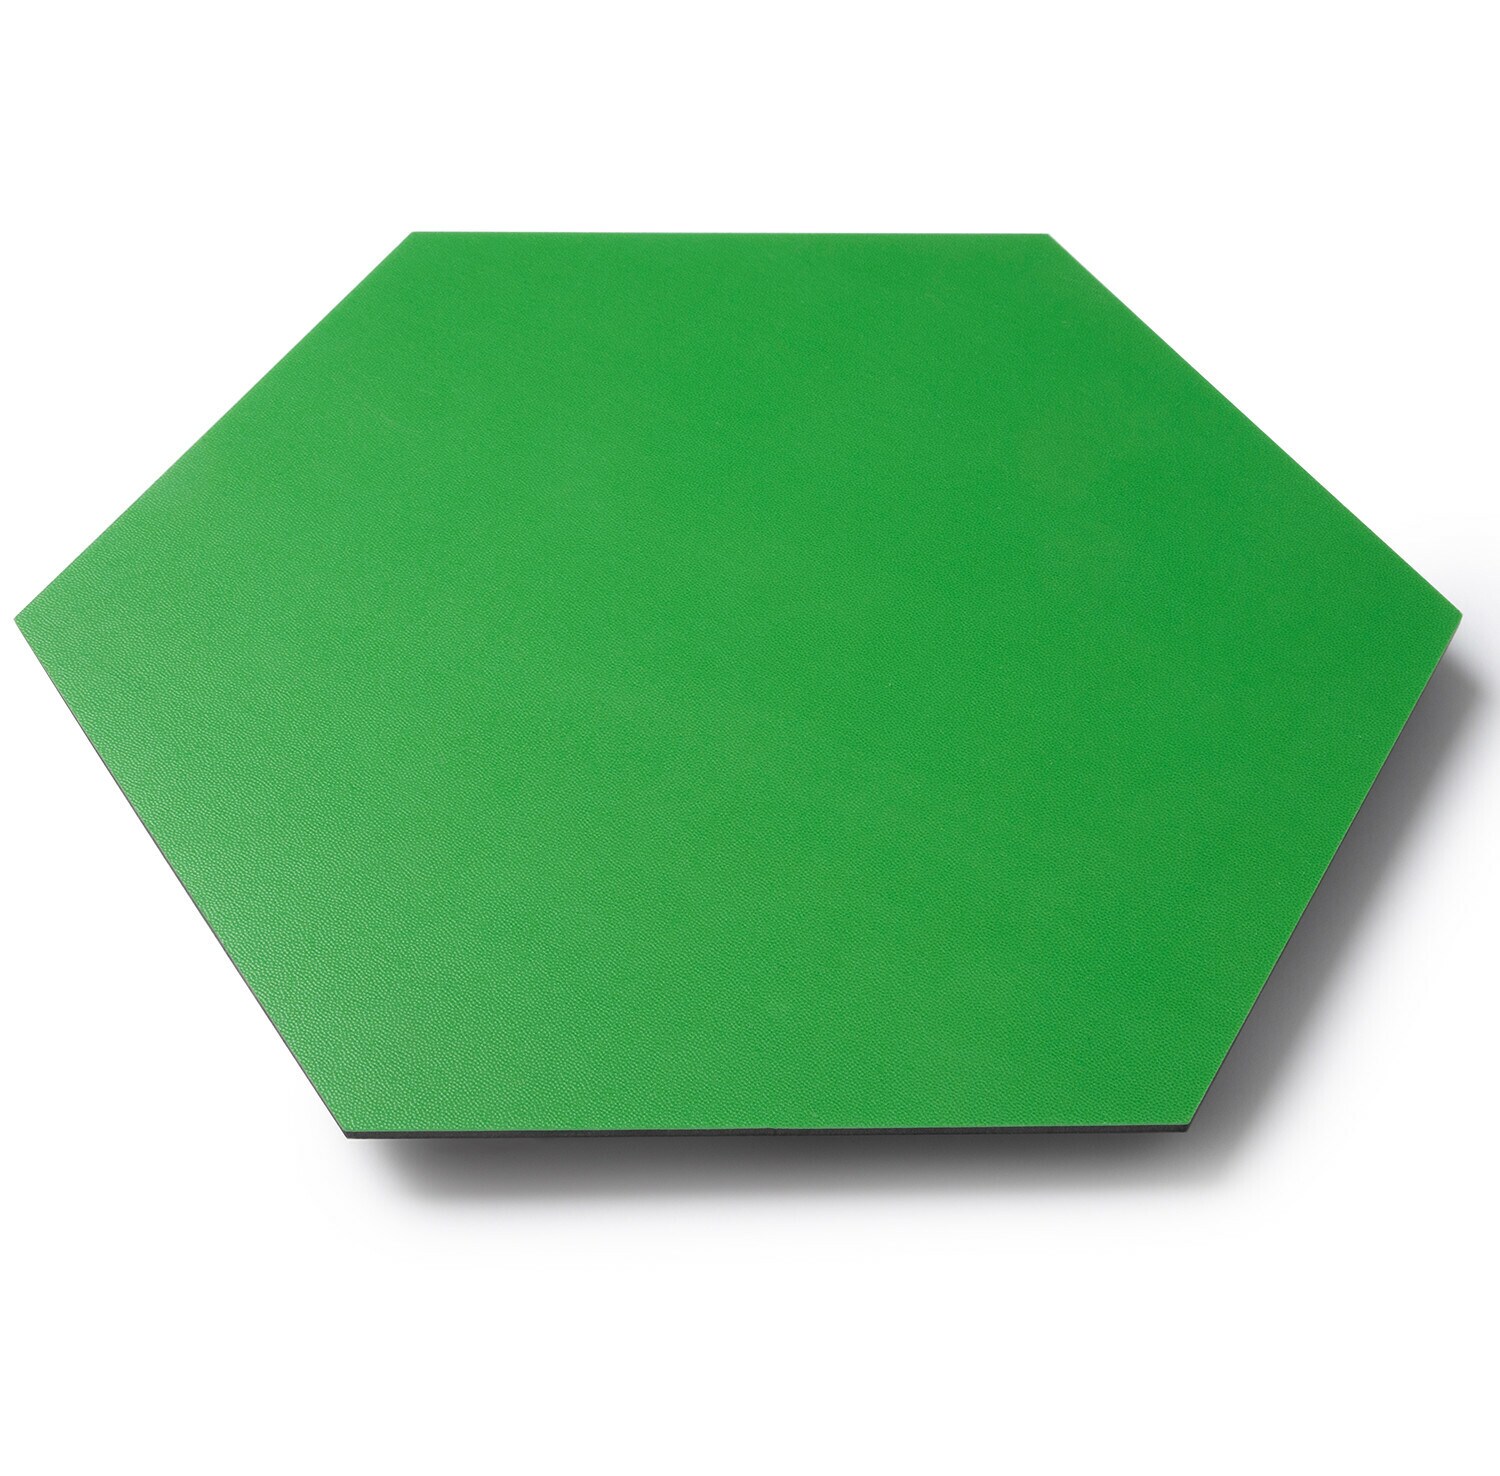 Green Vinyl Flooring - Take a Walk on the Tranquil Side with Green